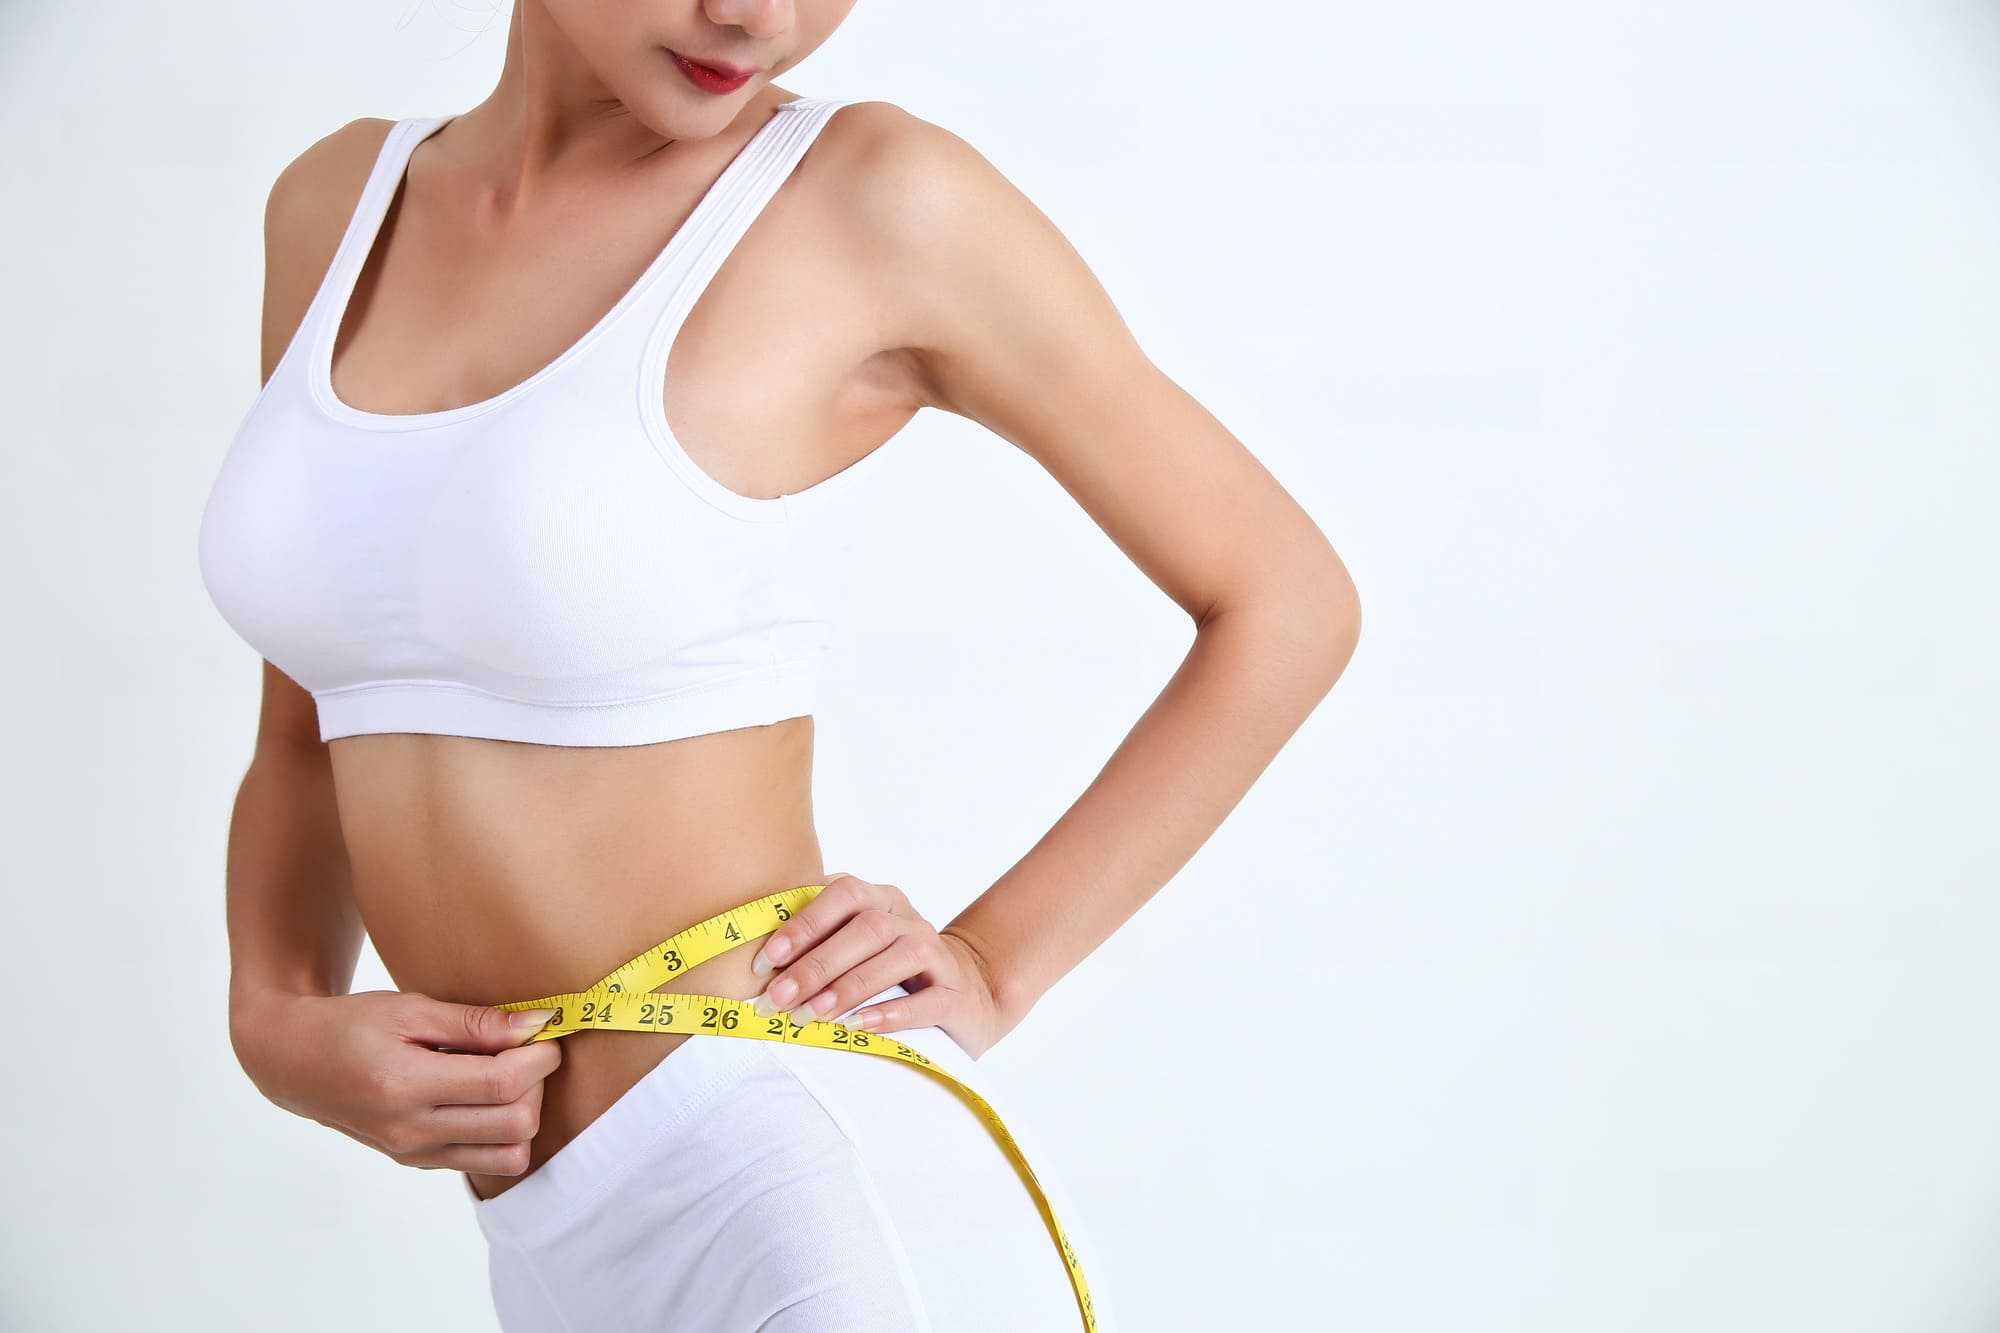 Check your body fat percentage online - Body fat percentage